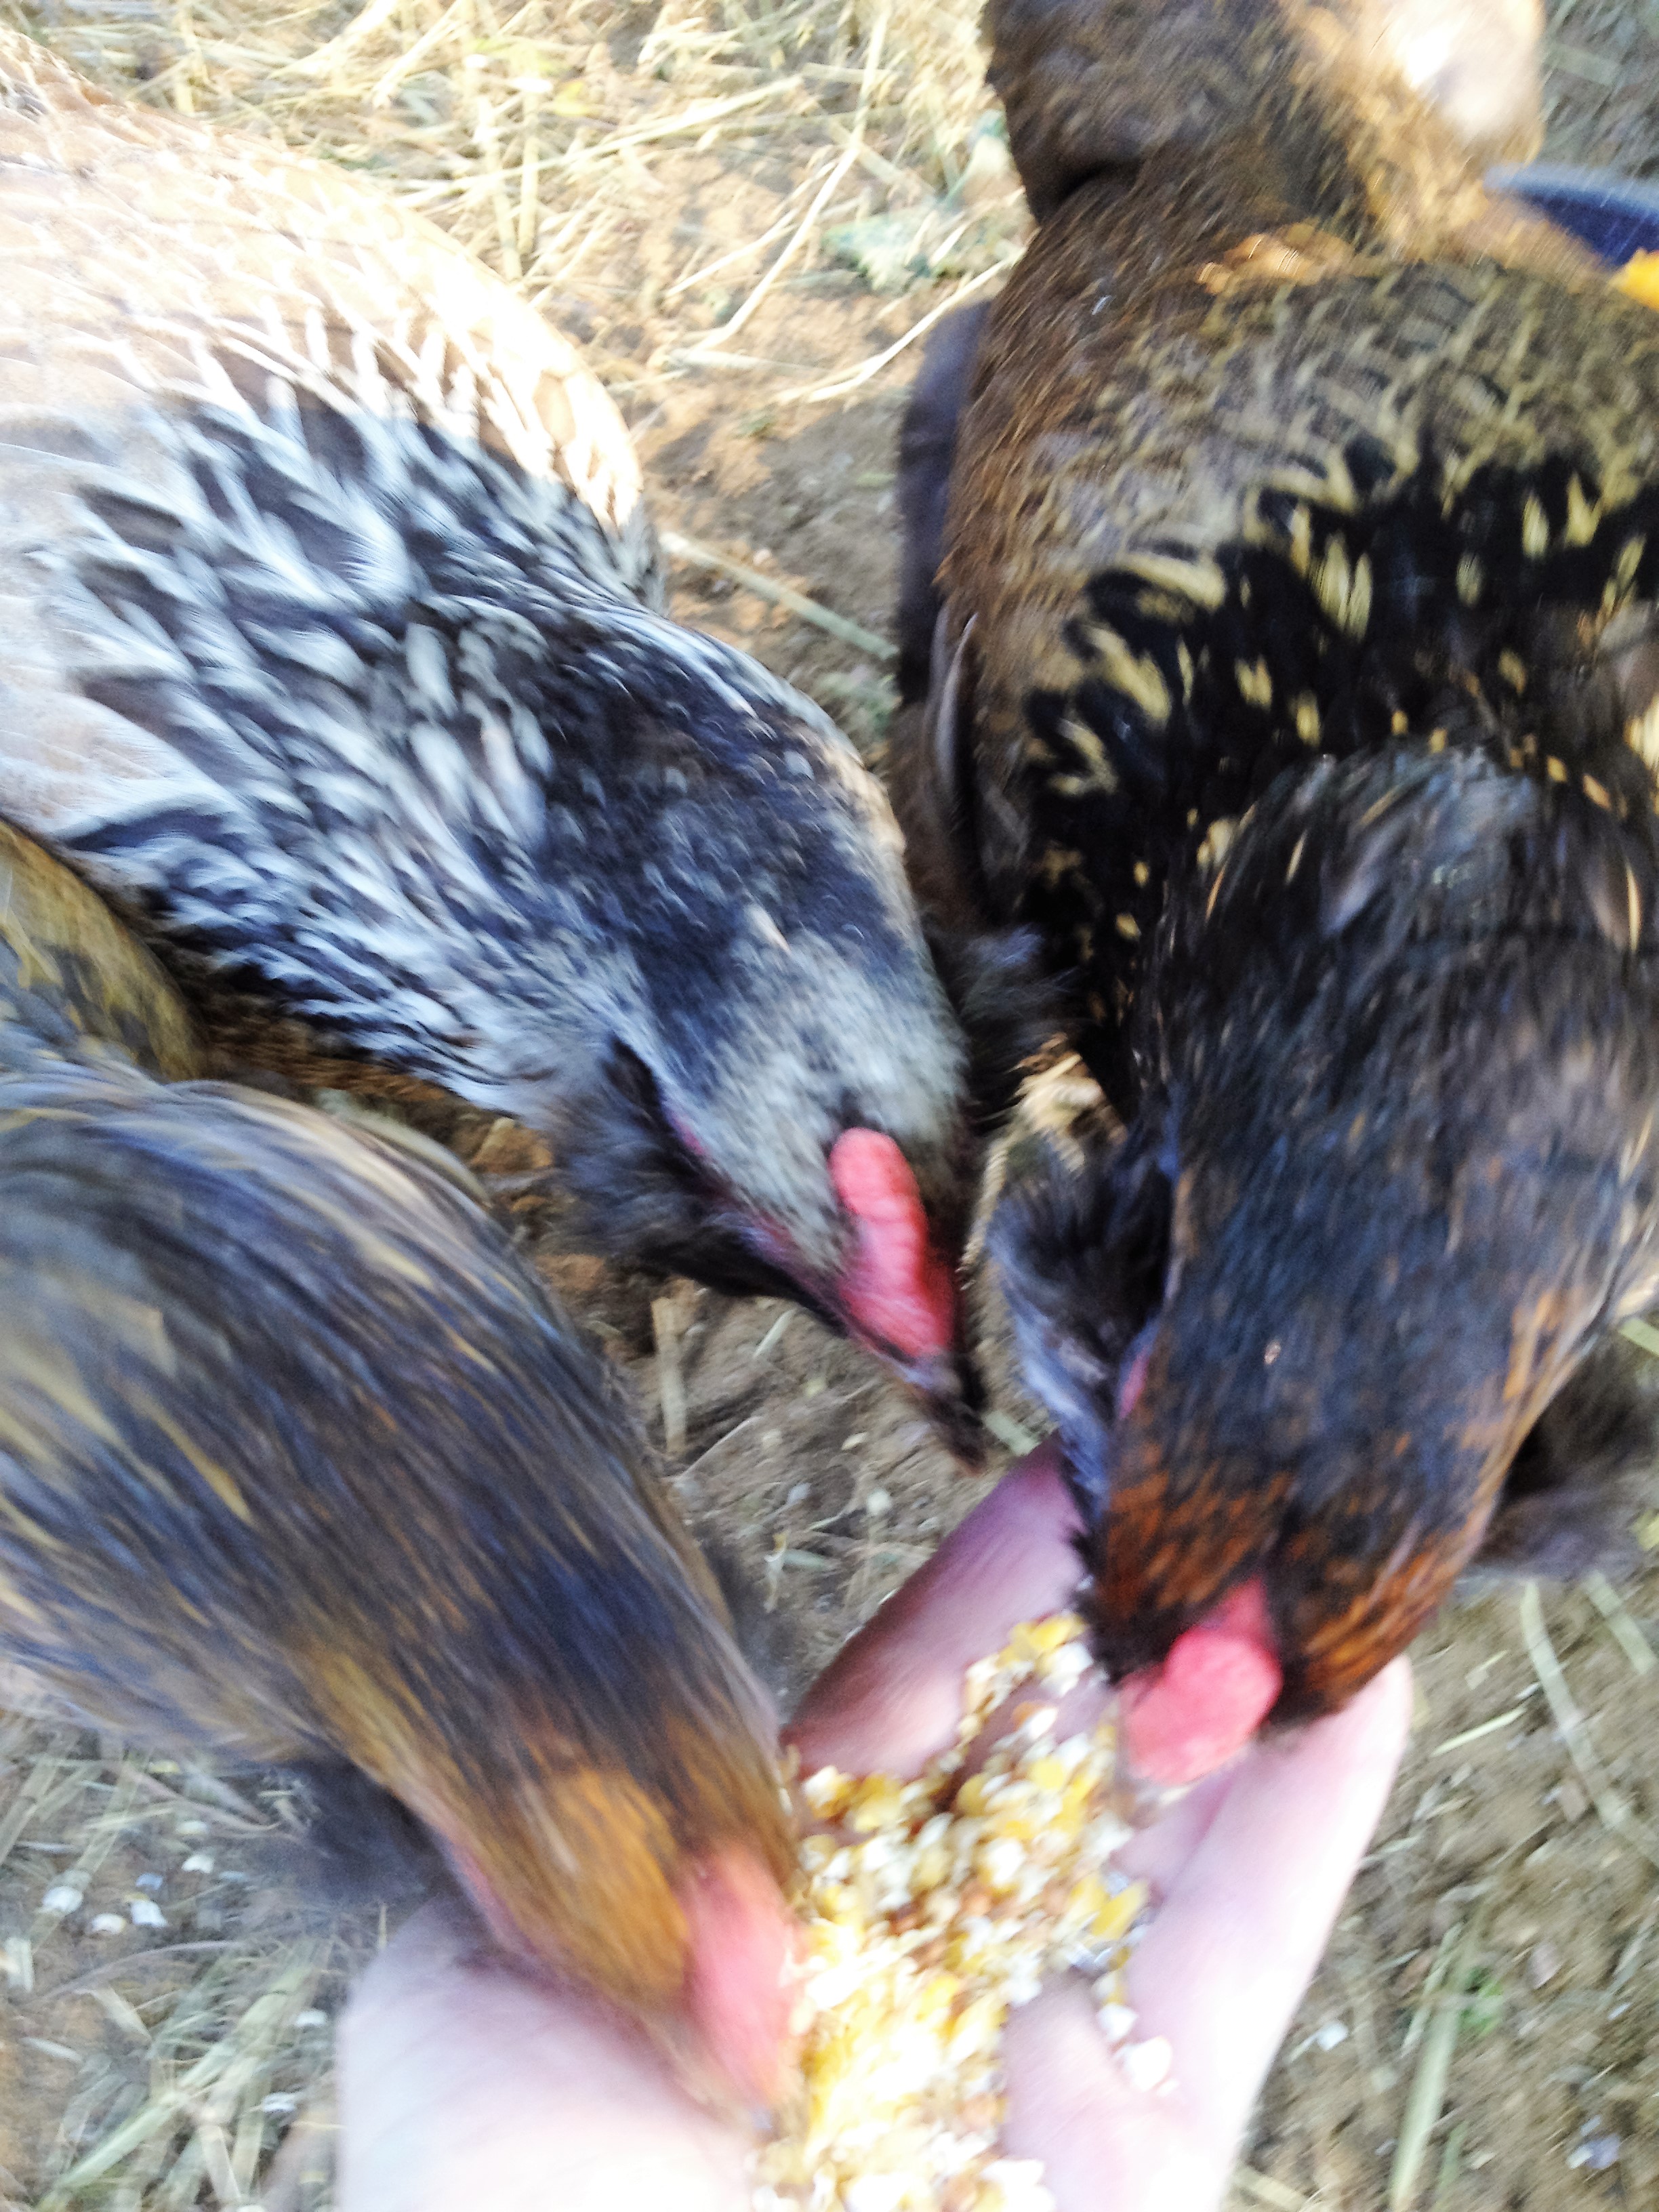 They do love cracked corn, don't they!